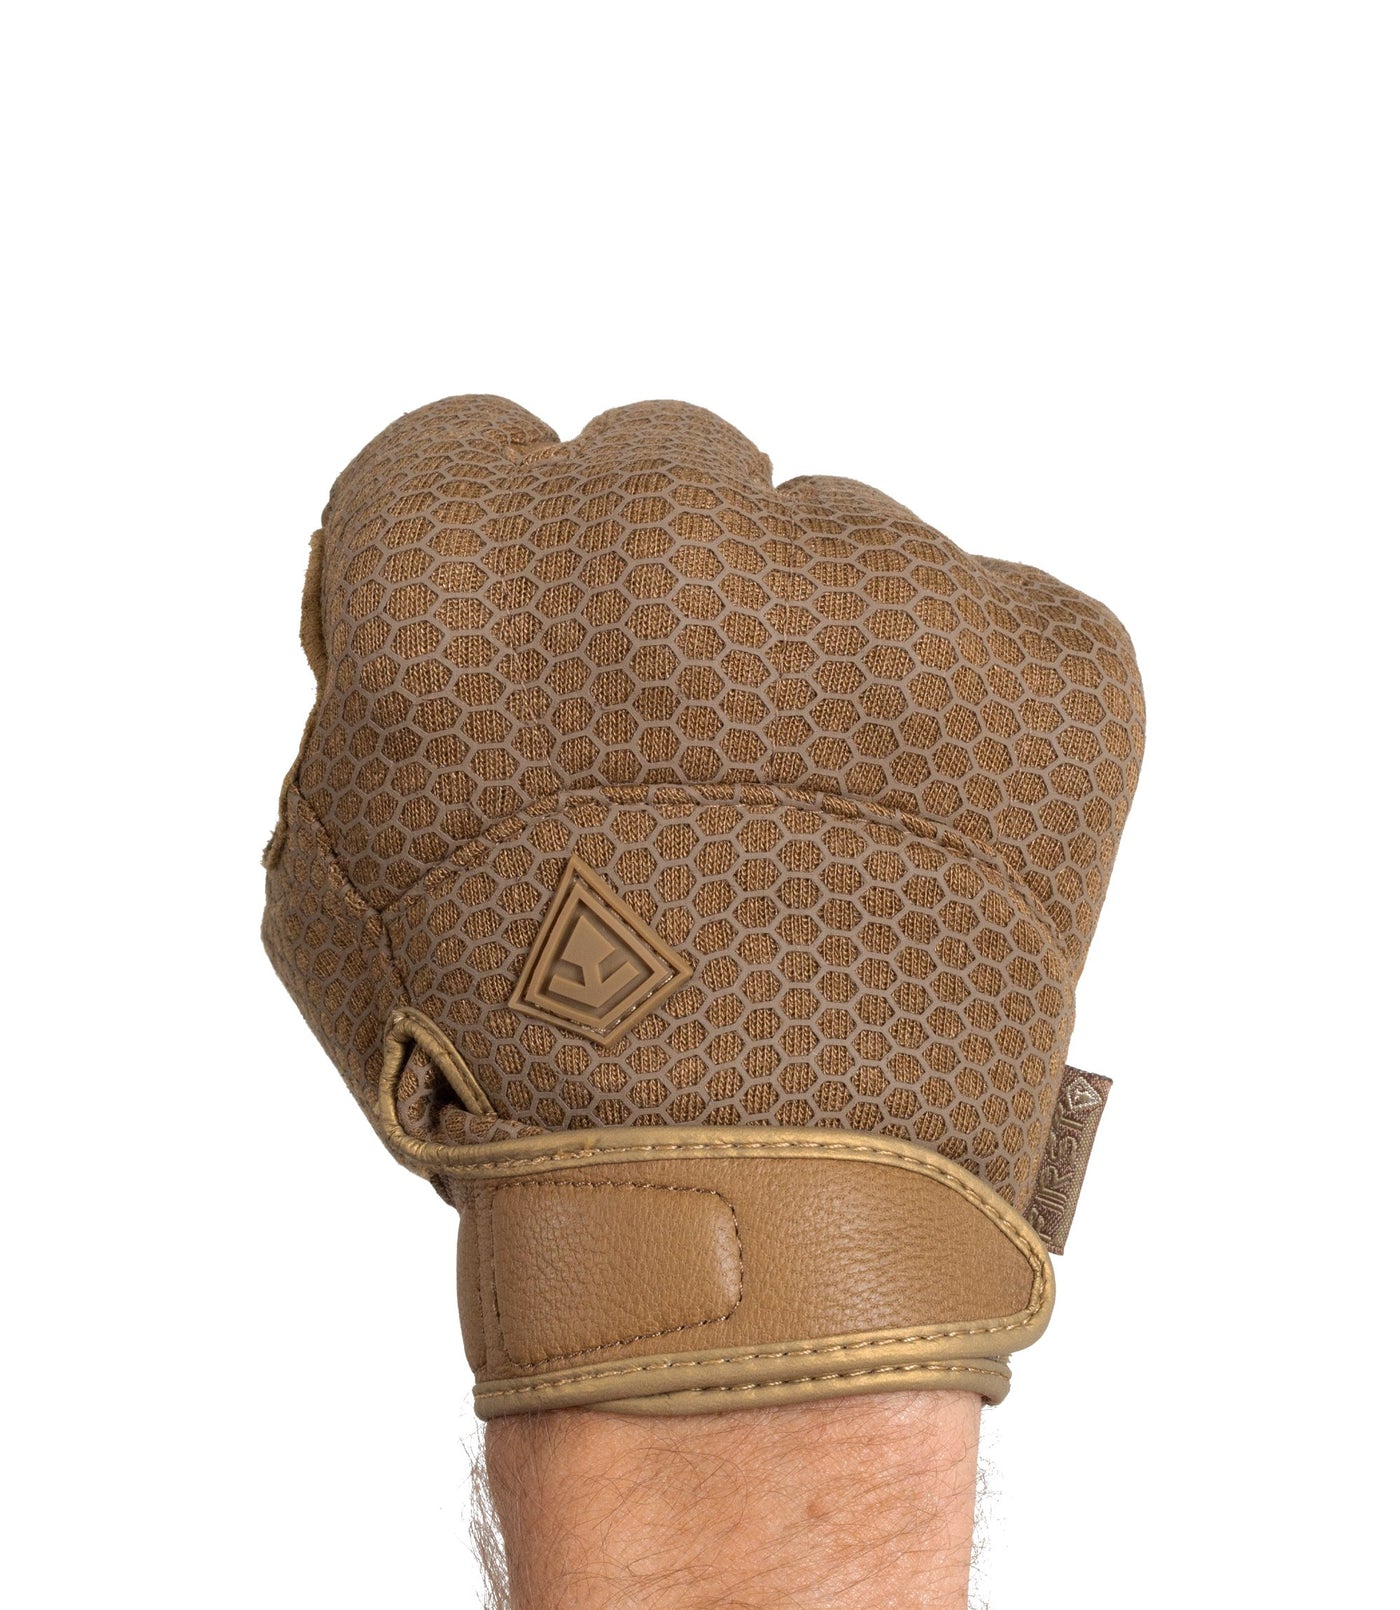 Men's Slash & Flash Protective Knuckle Glove in Coyote in a Fist 